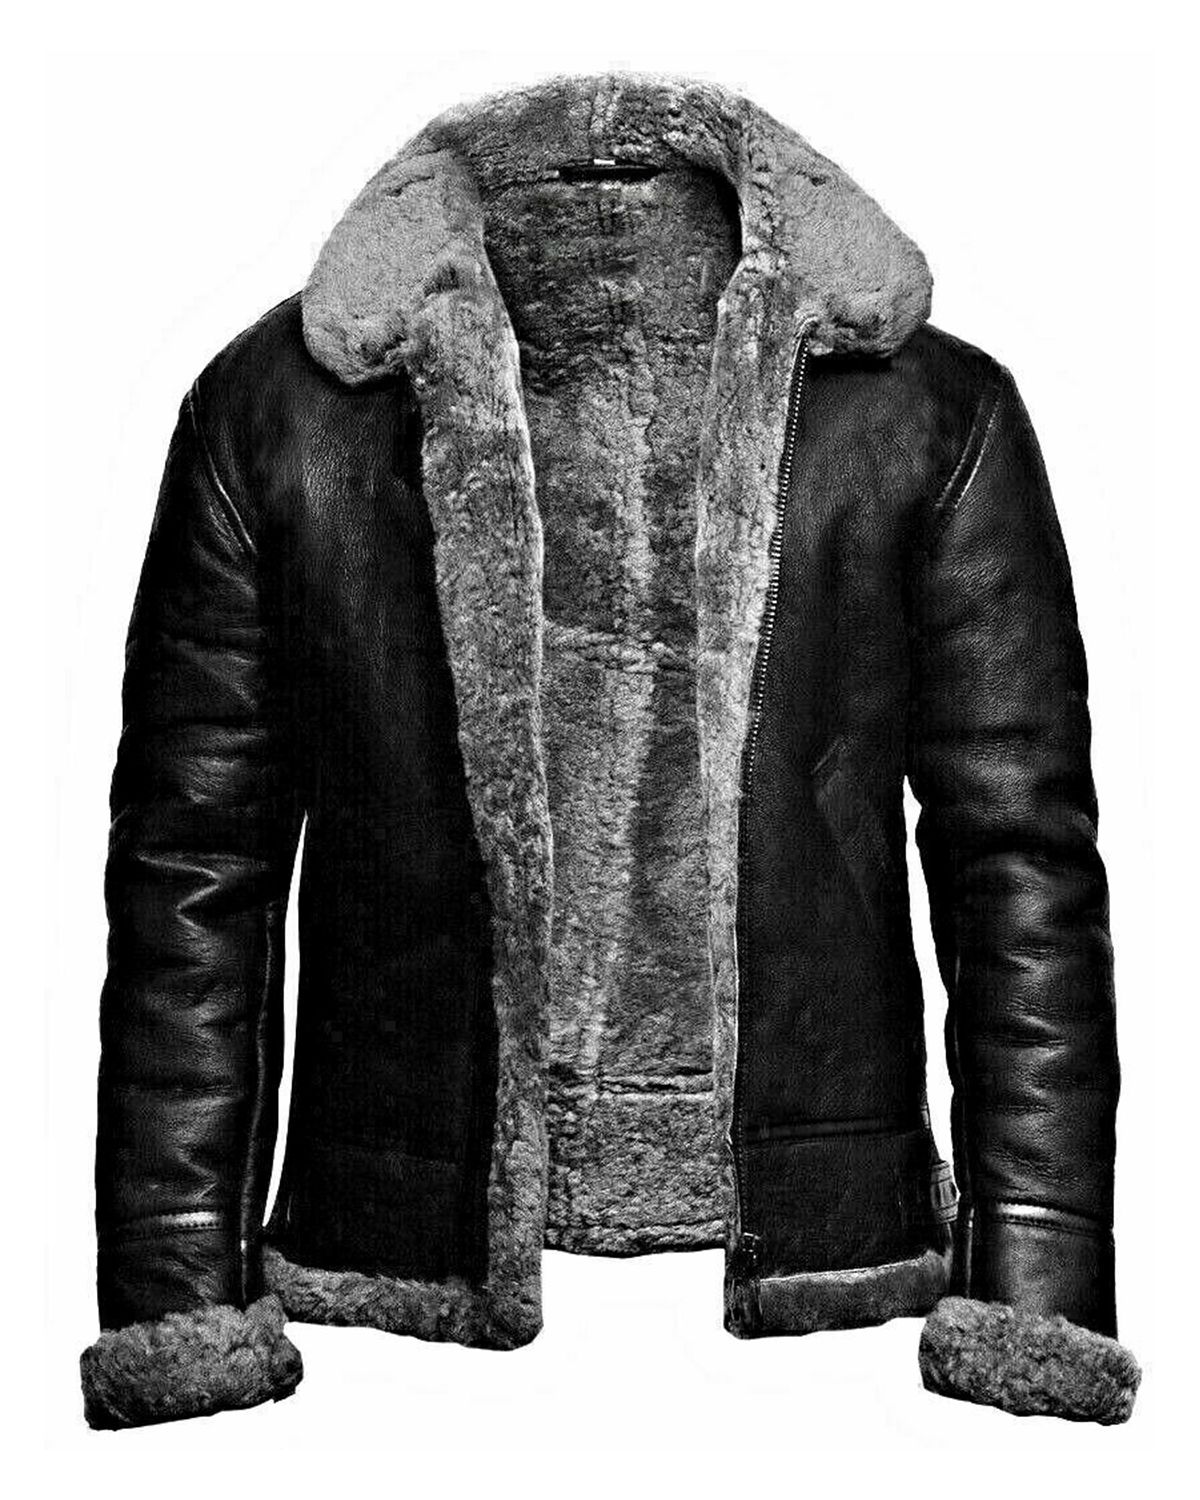 Leather Look Aviator With Faux Fur Collar